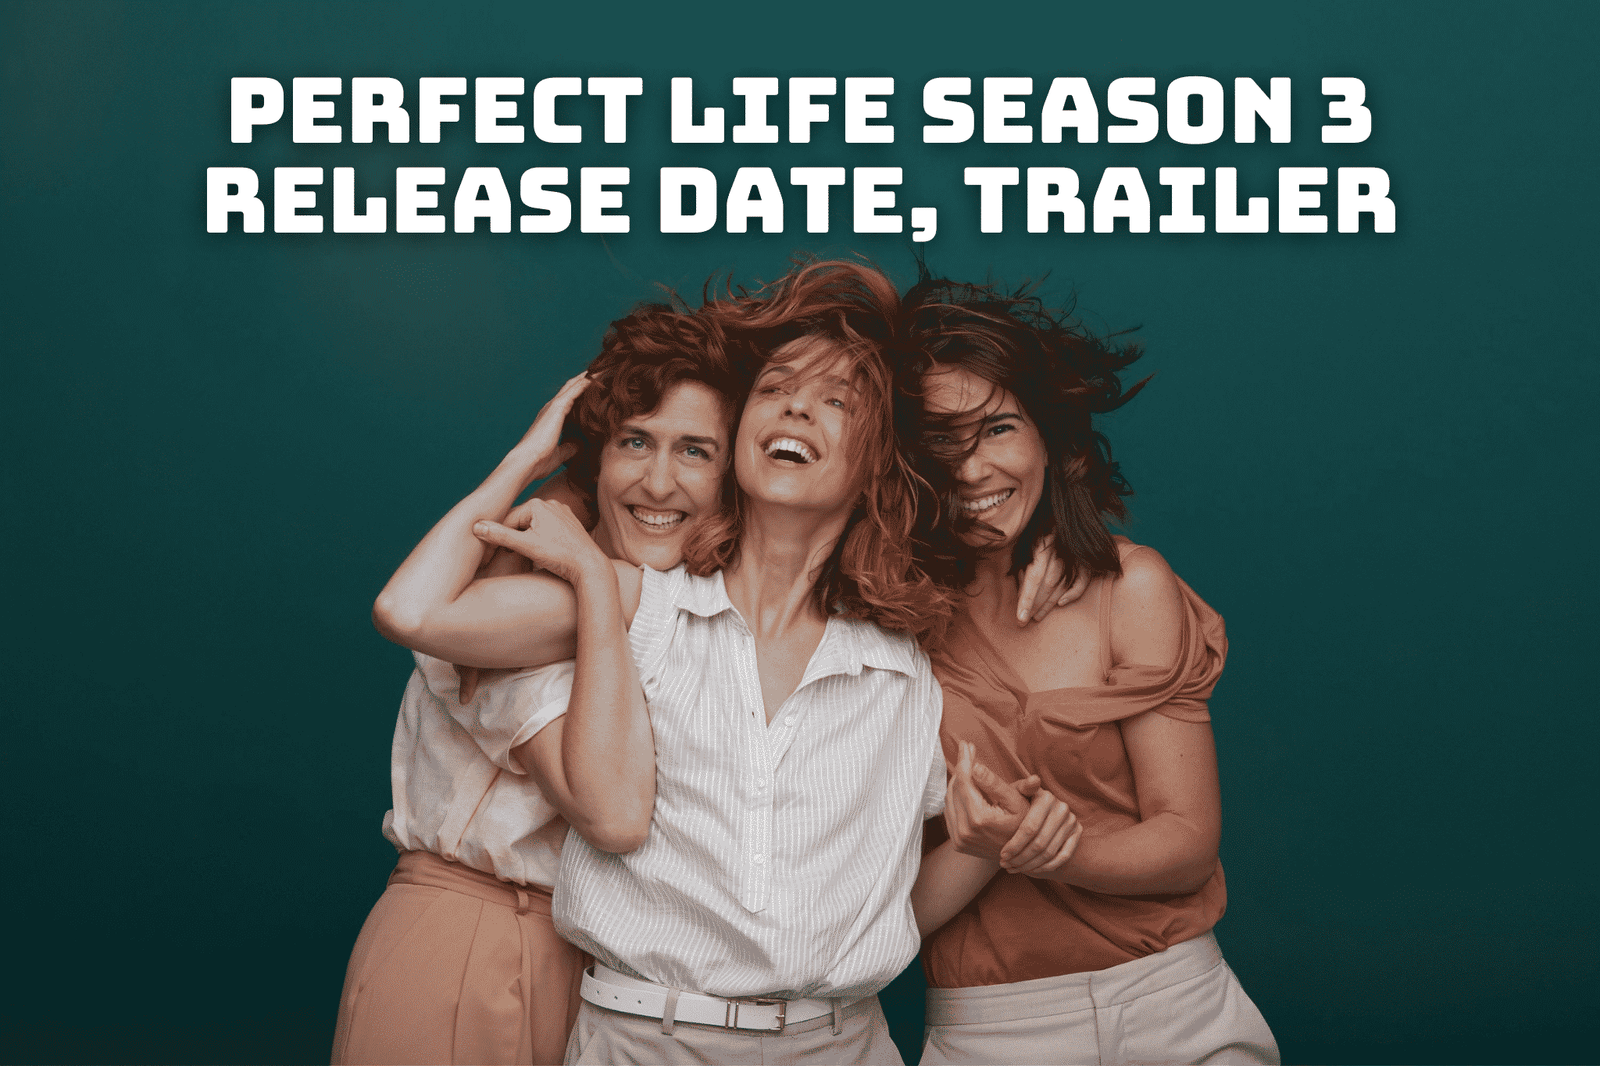 Perfect Life Season 3 Release Date, Trailer - Is it Canceled?